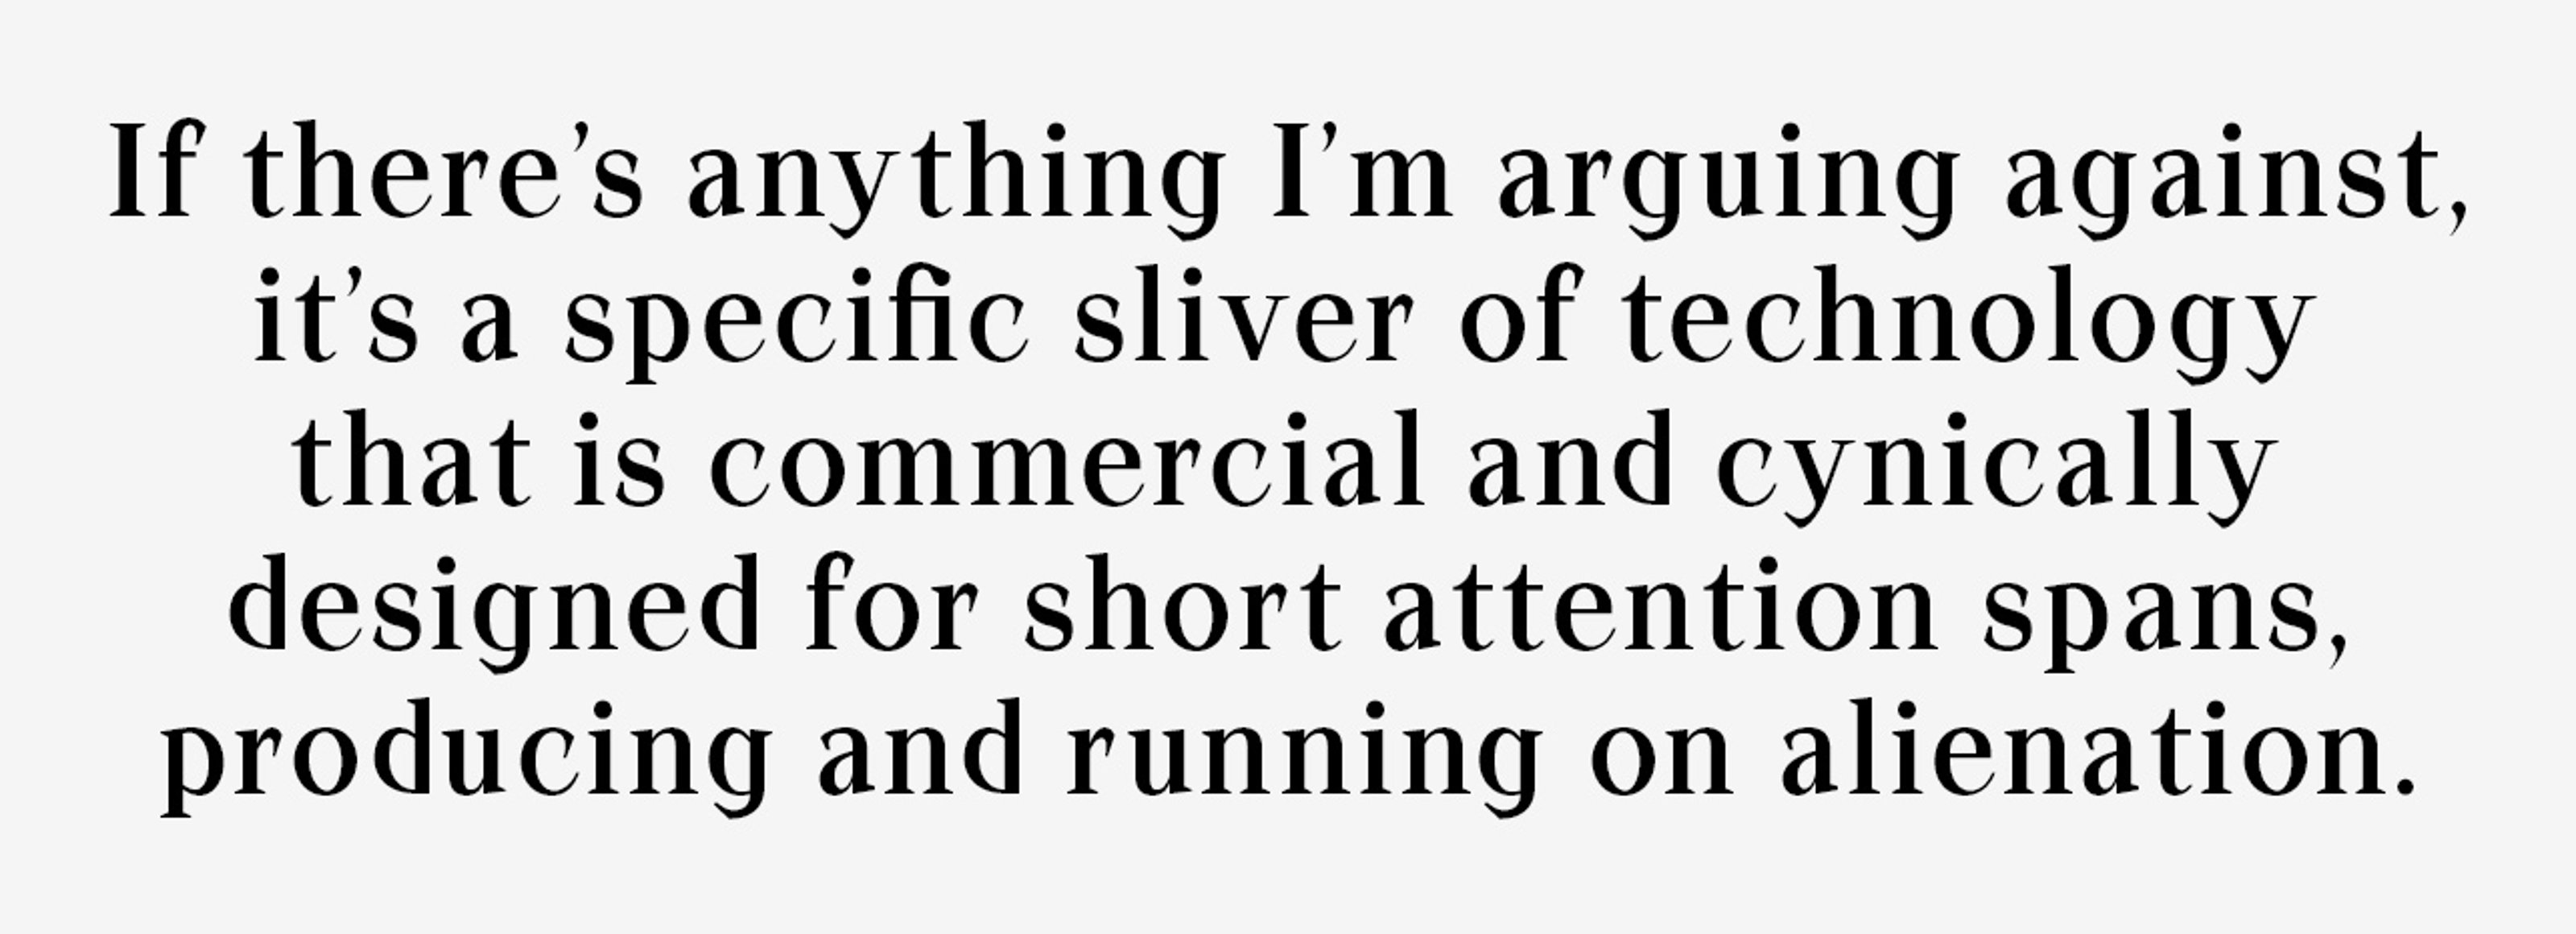 If there’s anything I’m arguing against, it’s a specific sliver of technology that is commercial and cynically designed for short attention spans, producing and running on alienation.